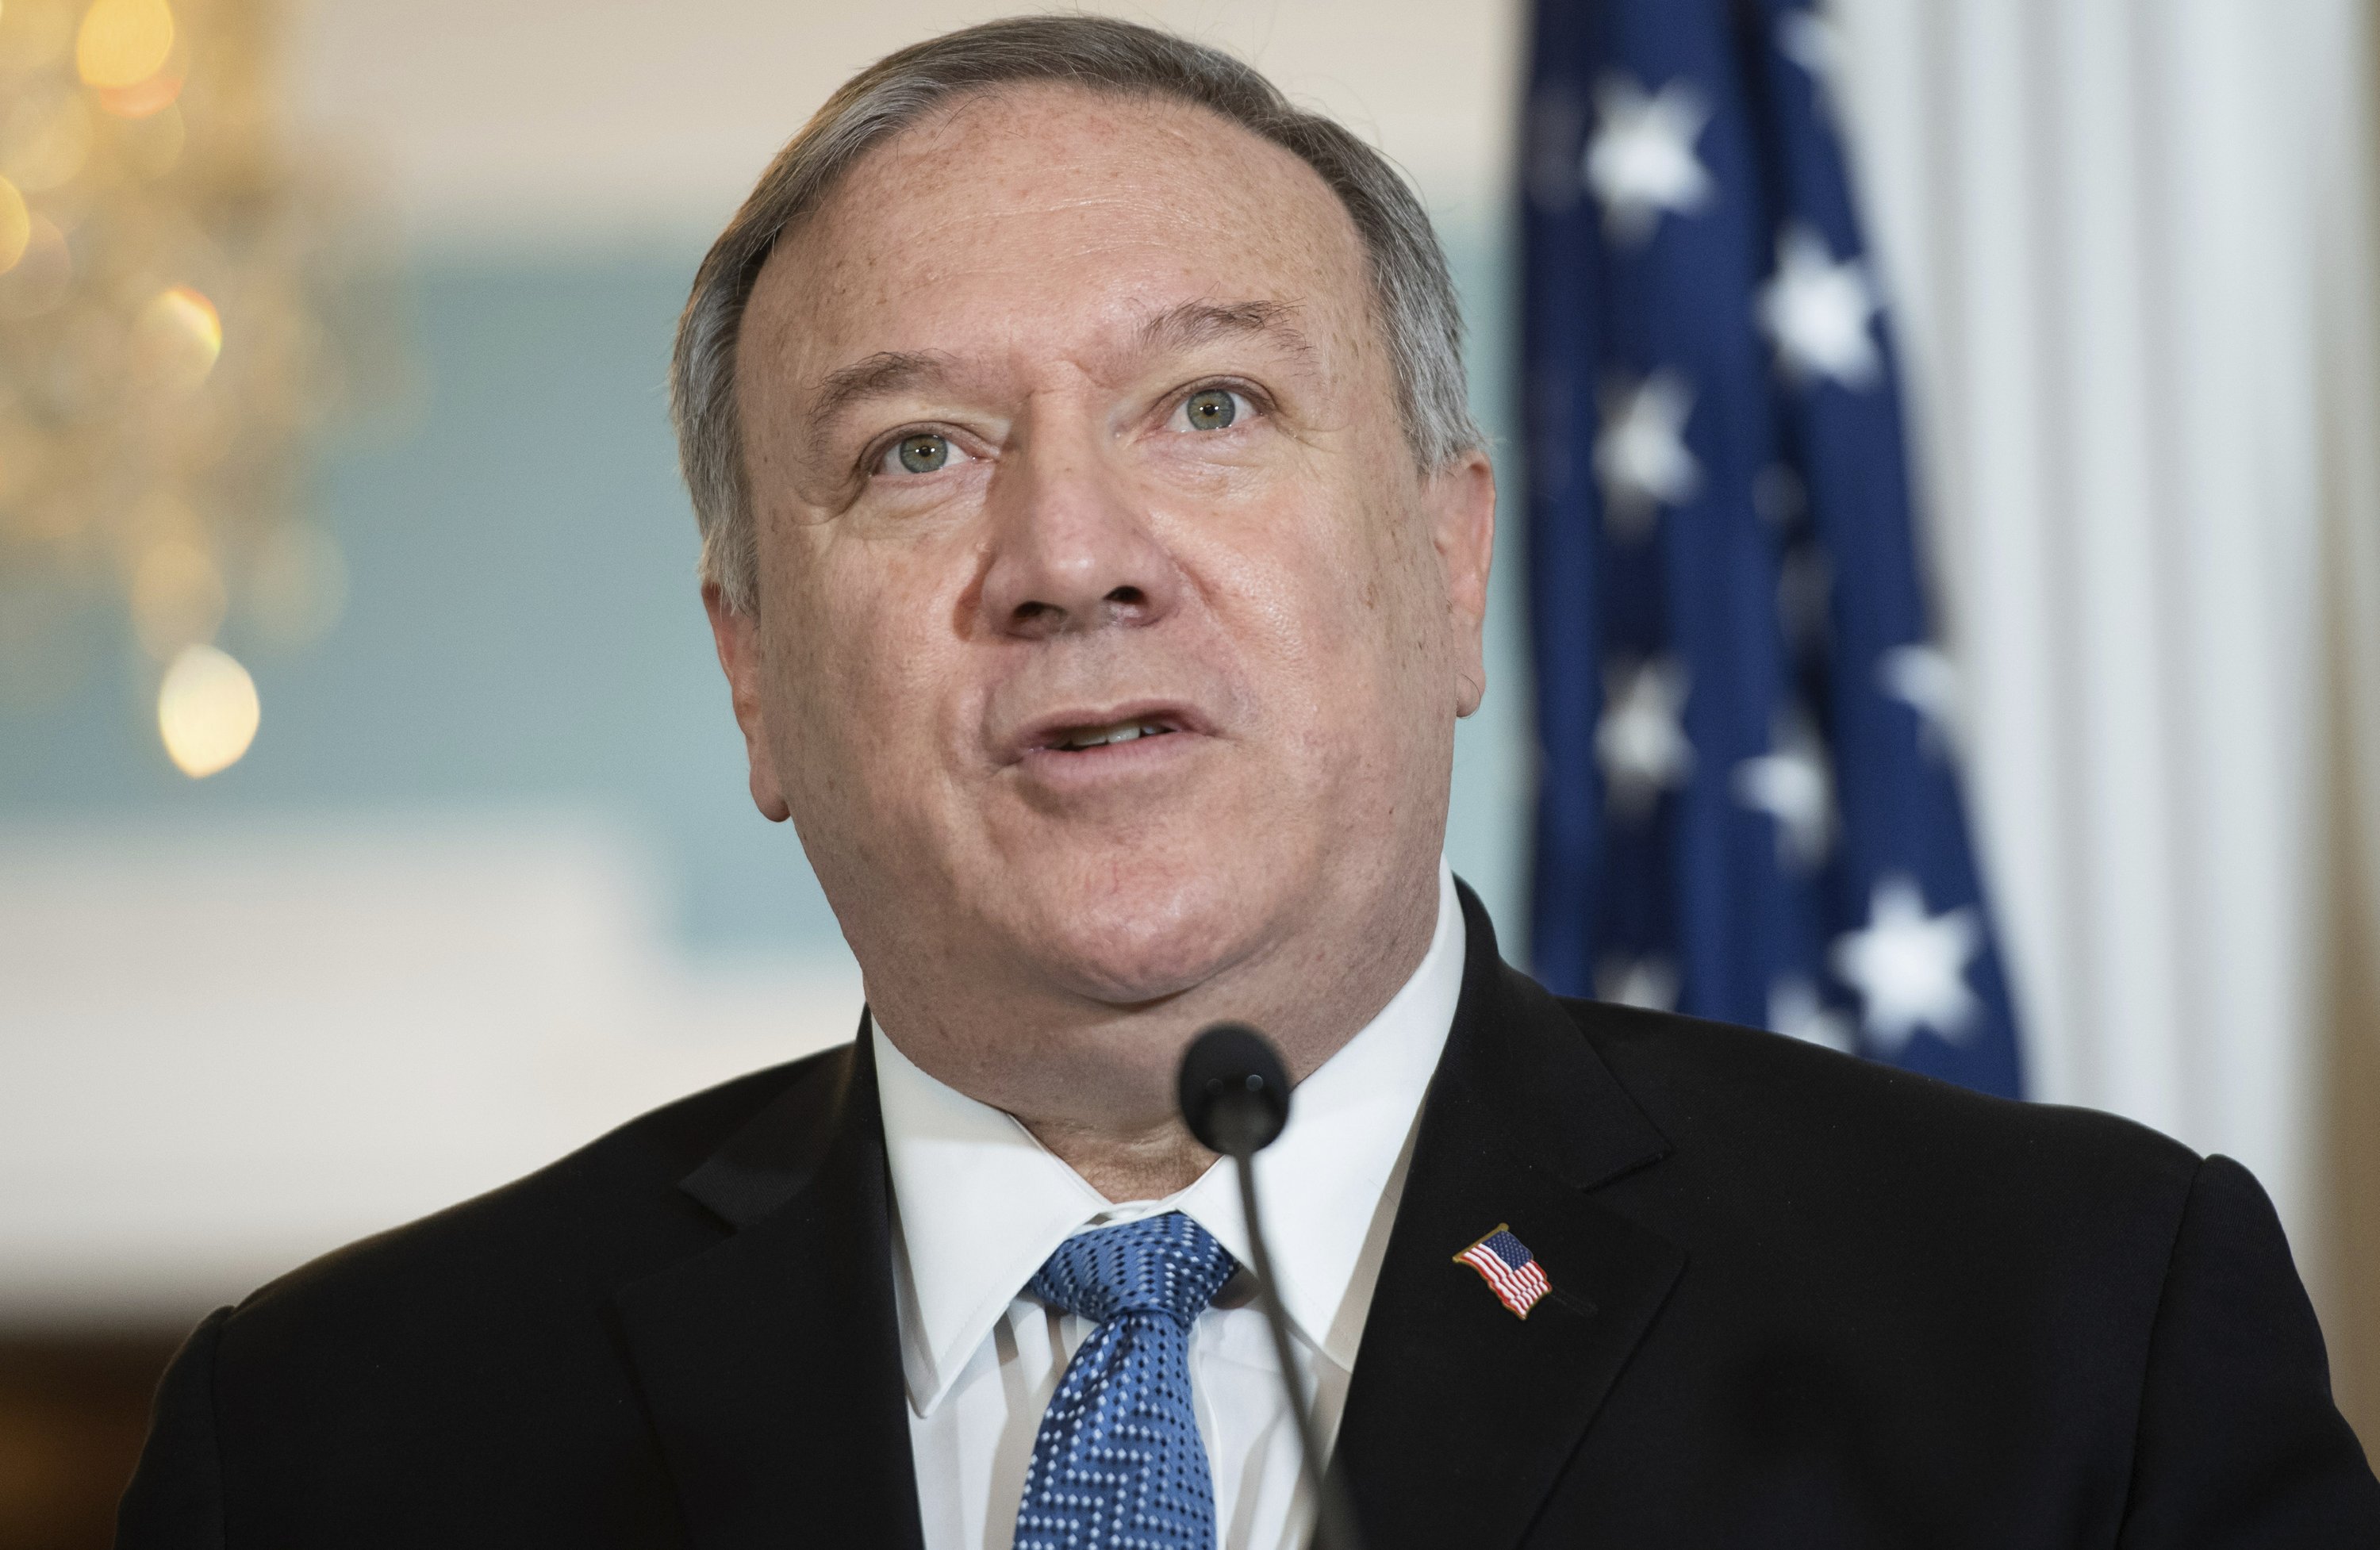 Yemen, China, Cuba, Pompeo’s best to-do list as time goes on